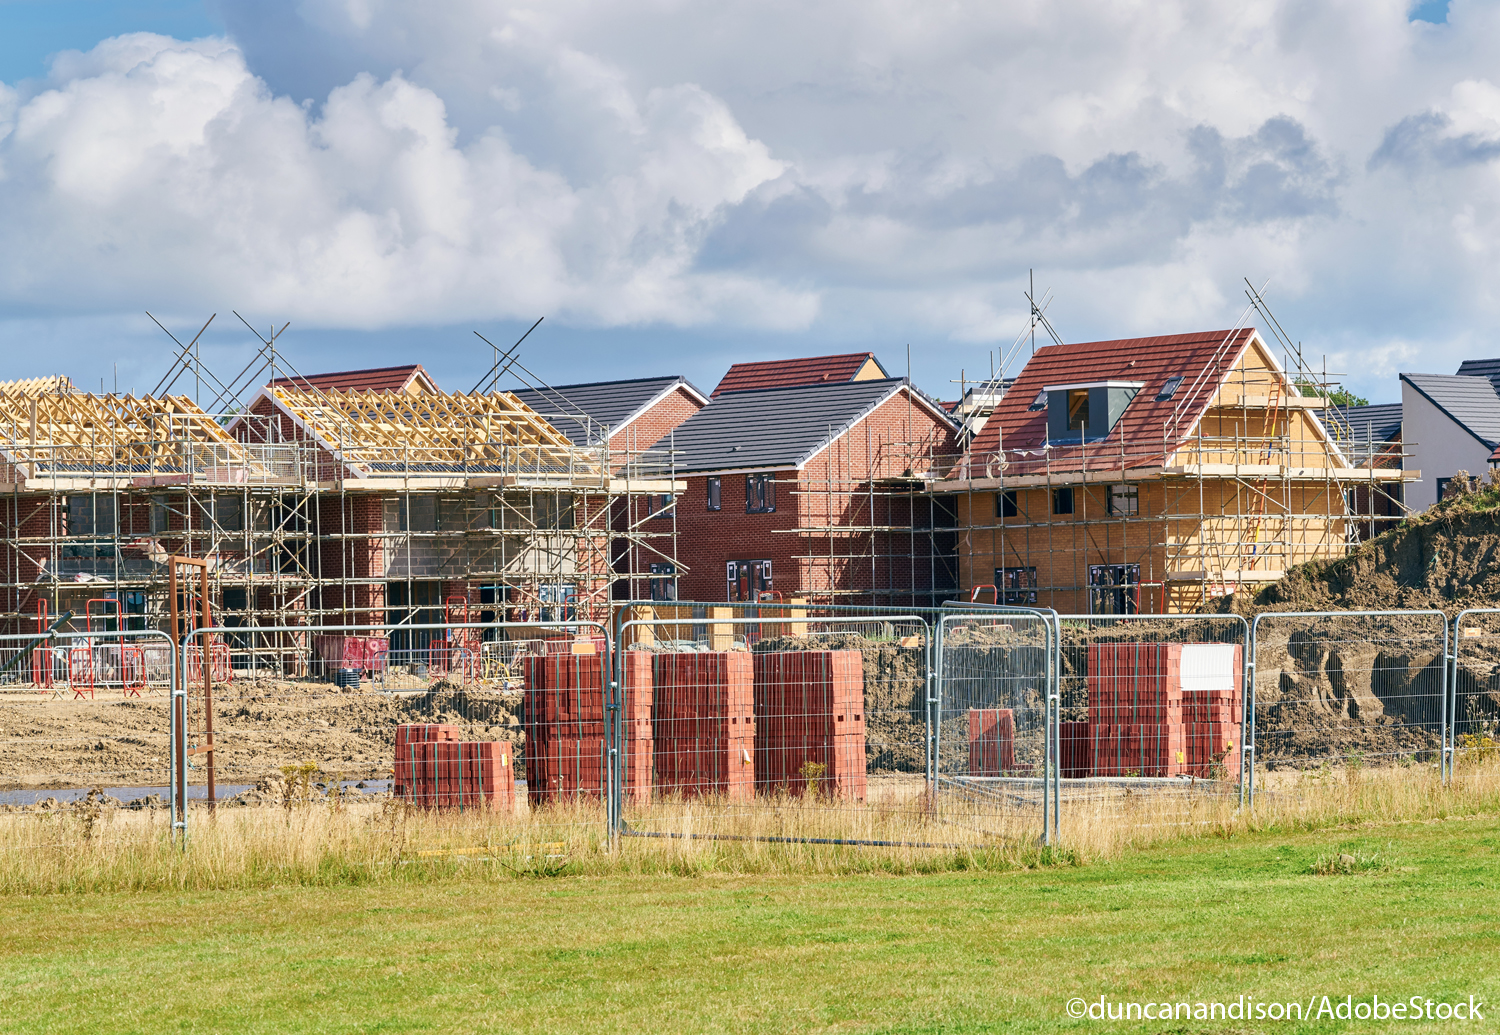 UK regions overtake London in total number of build-to-rent homes